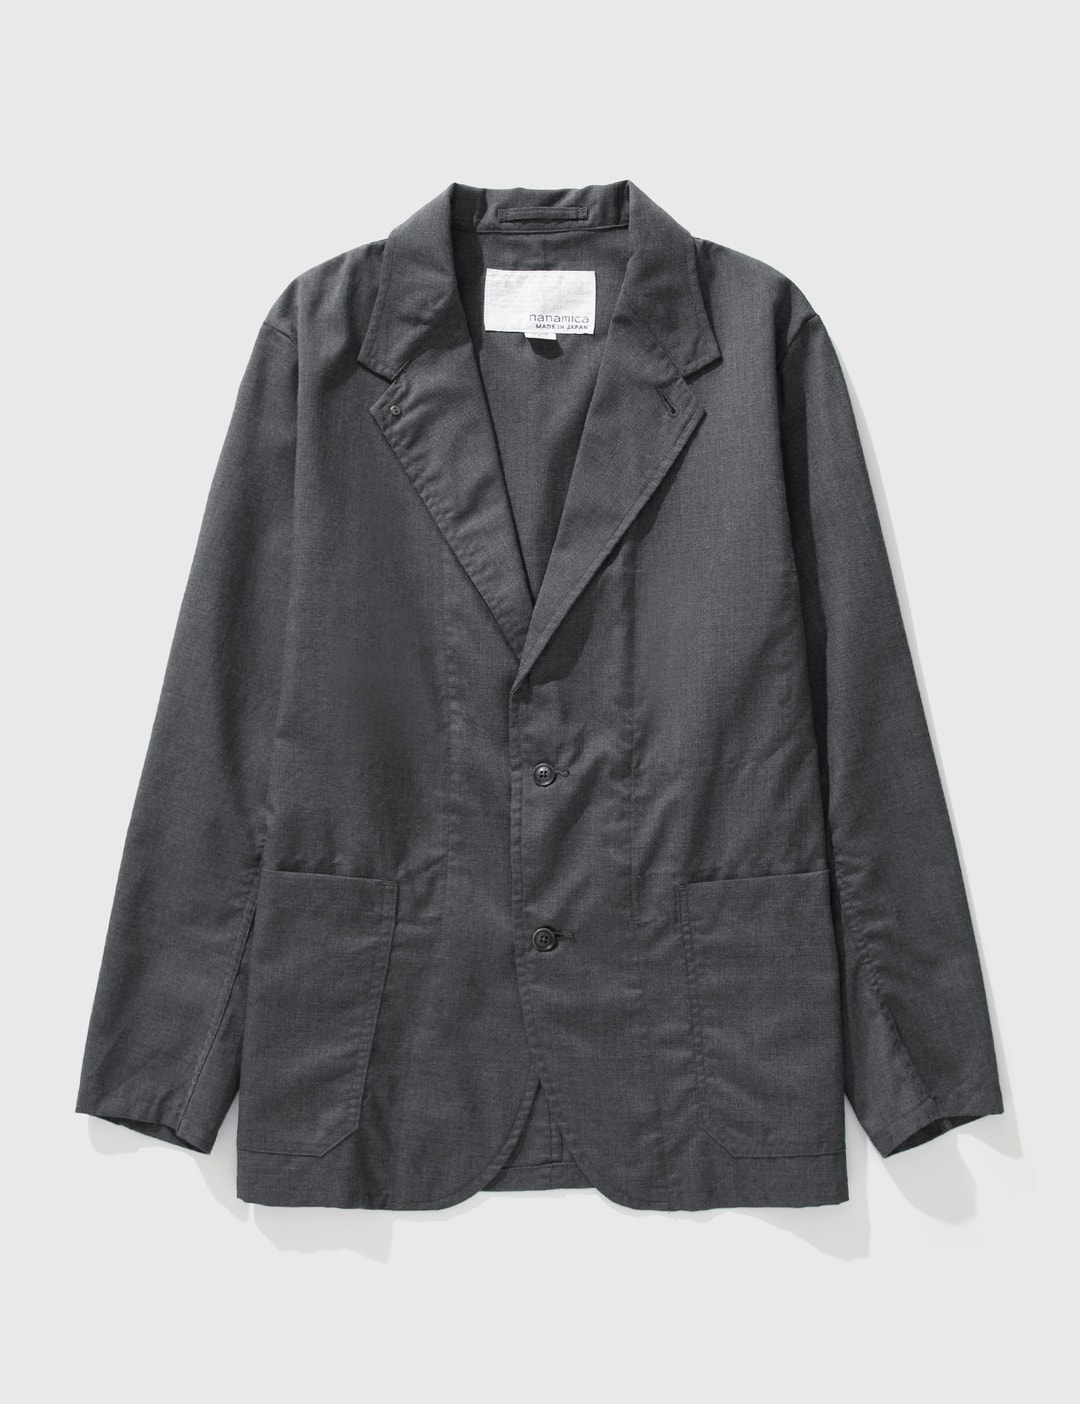 Nanamica - Club Jacket | HBX - Globally Curated Fashion and Lifestyle ...